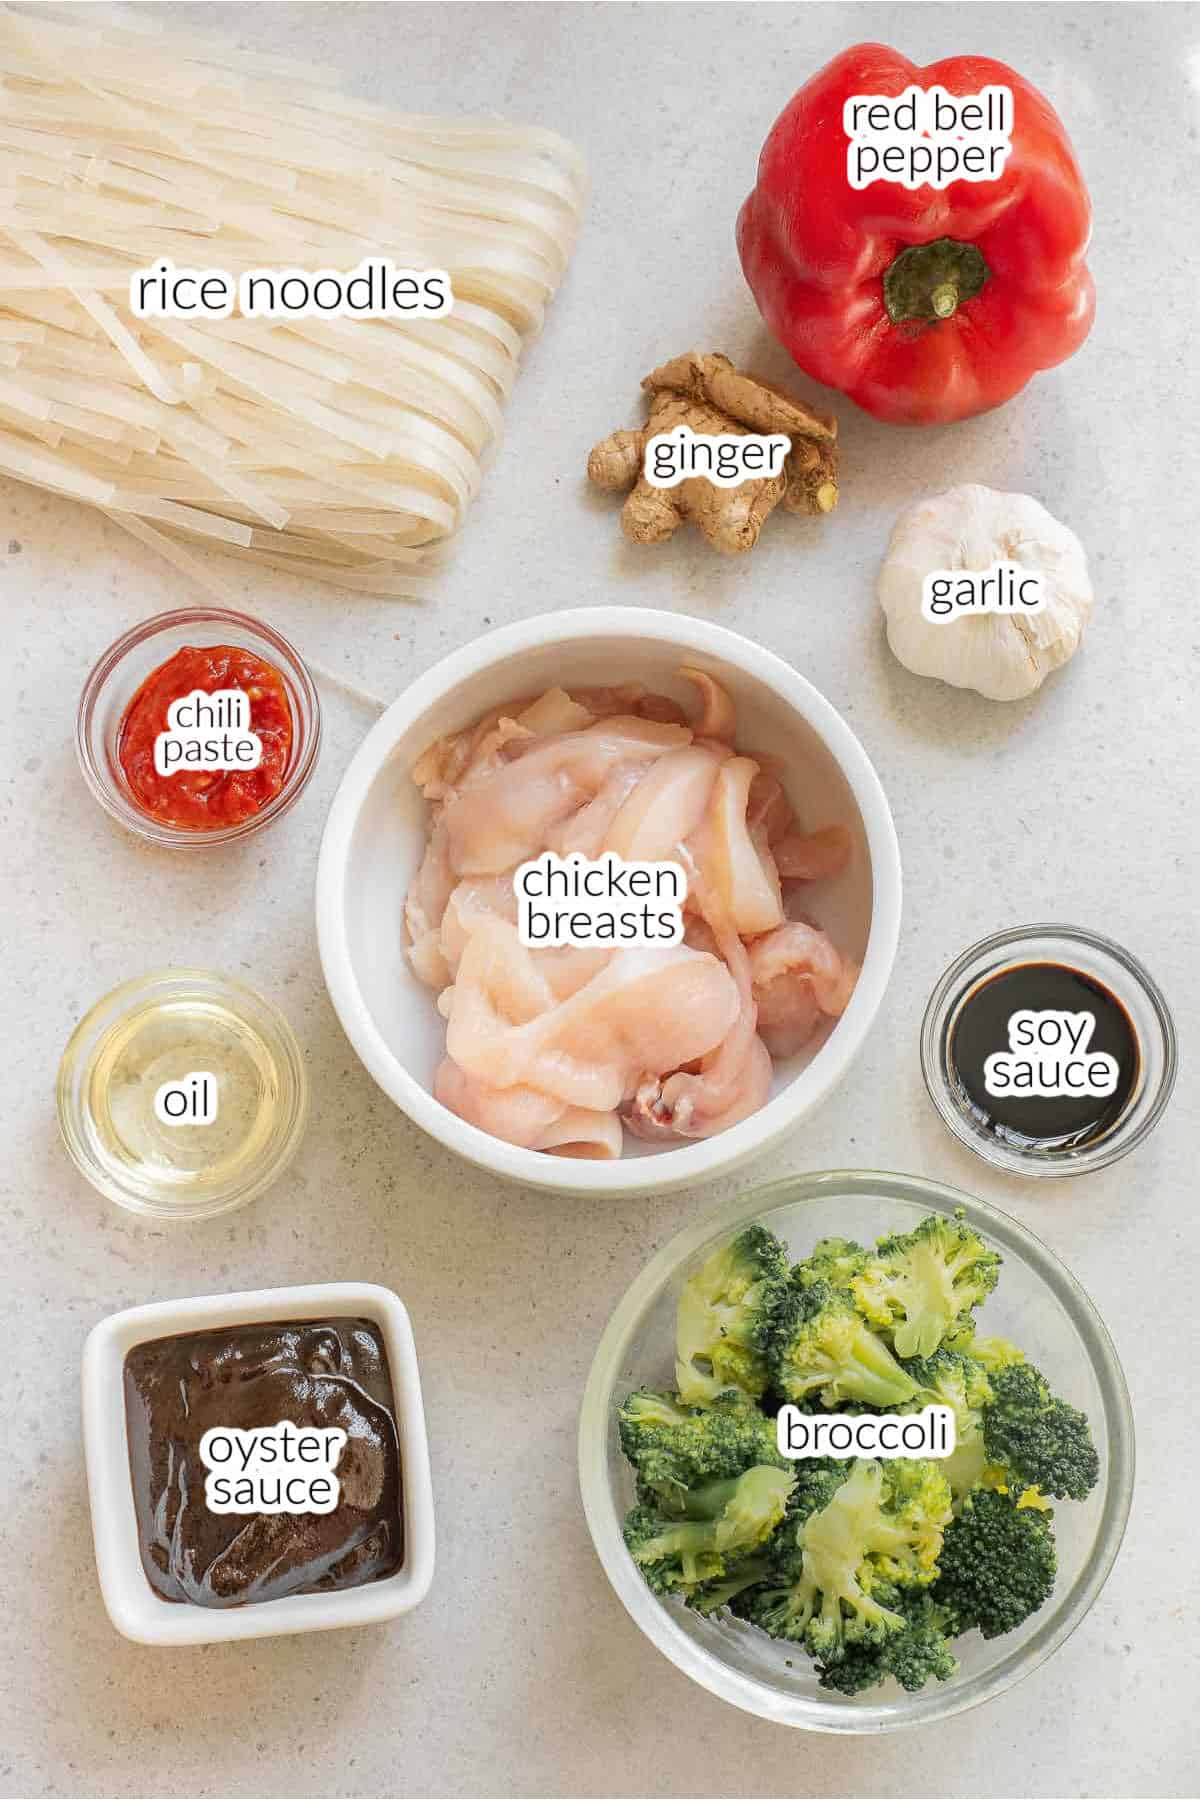 Ingredients for thai drunken noodles recipe - ice noodles, raw chicken strips, broccoli, red bell pepper, chili paste, garlic, ginger, oyster sauce.